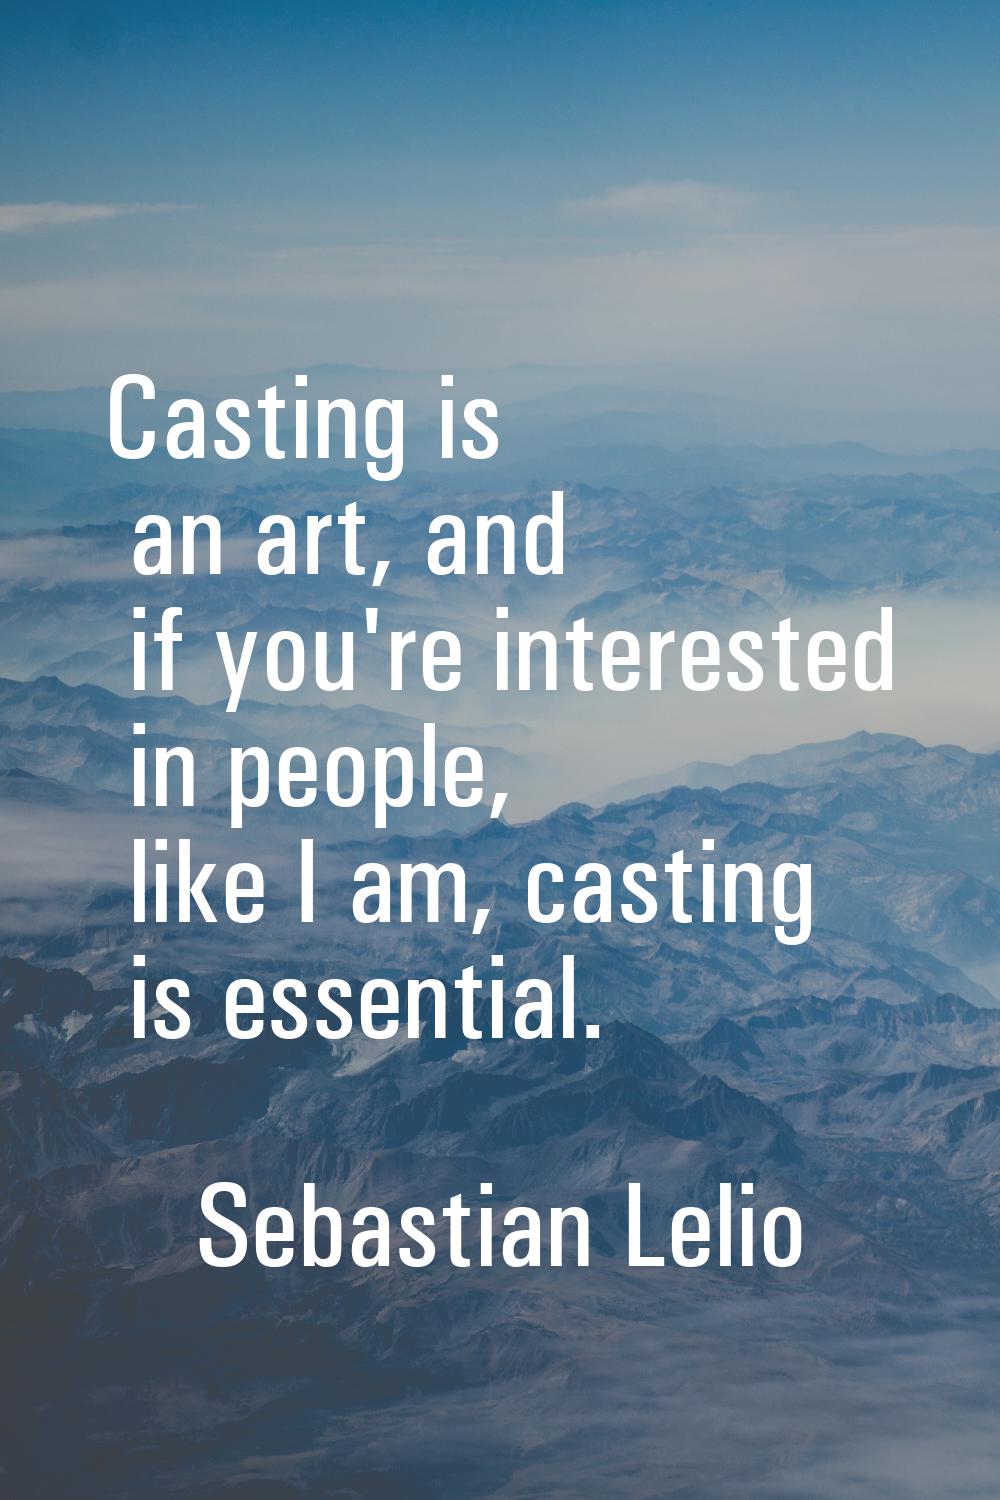 Casting is an art, and if you're interested in people, like I am, casting is essential.